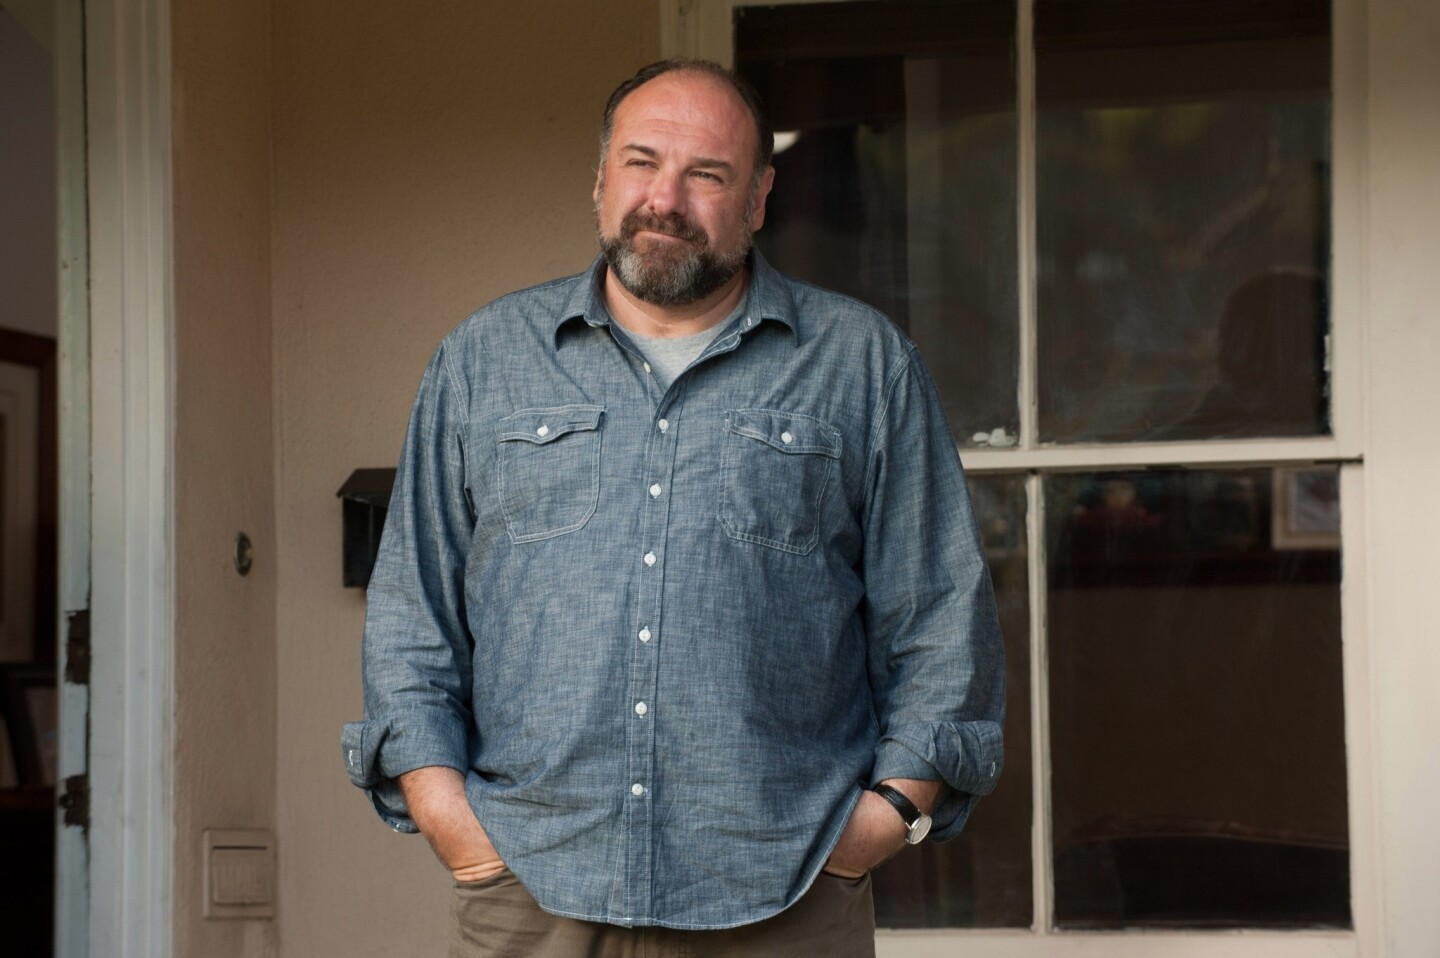 James Gandolfini's untimely death in June overshadowed his well-regarded final performance in Nicole Holofcener's romantic comedy, so it was a surprise (though a welcome one) to see the actor honored posthumously with a nomination for supporting actor in a motion picture.